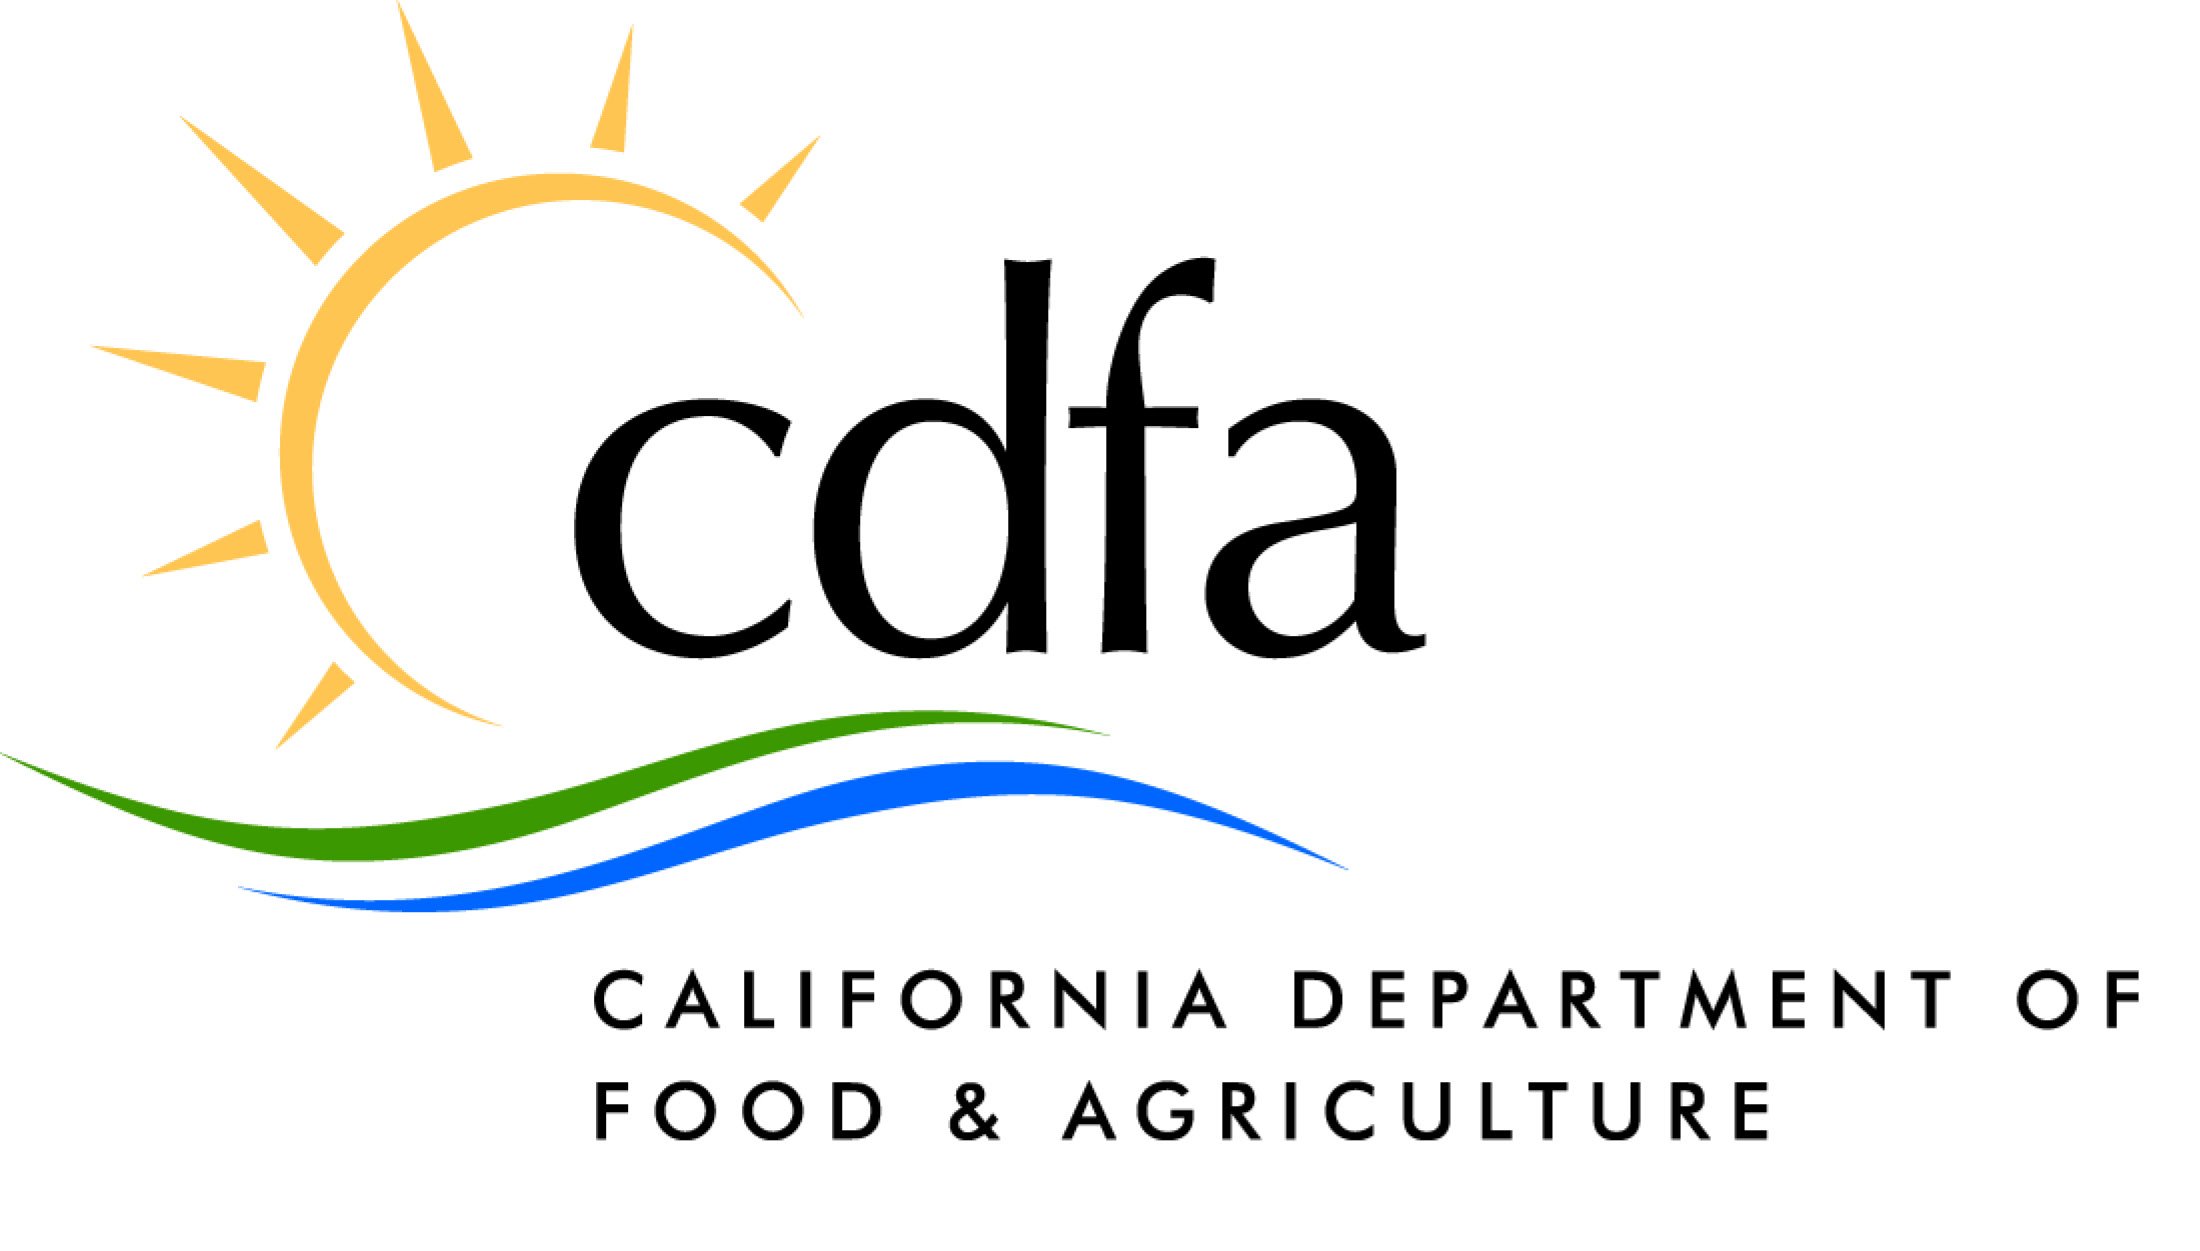 California Department of Food and Agriculture Logo